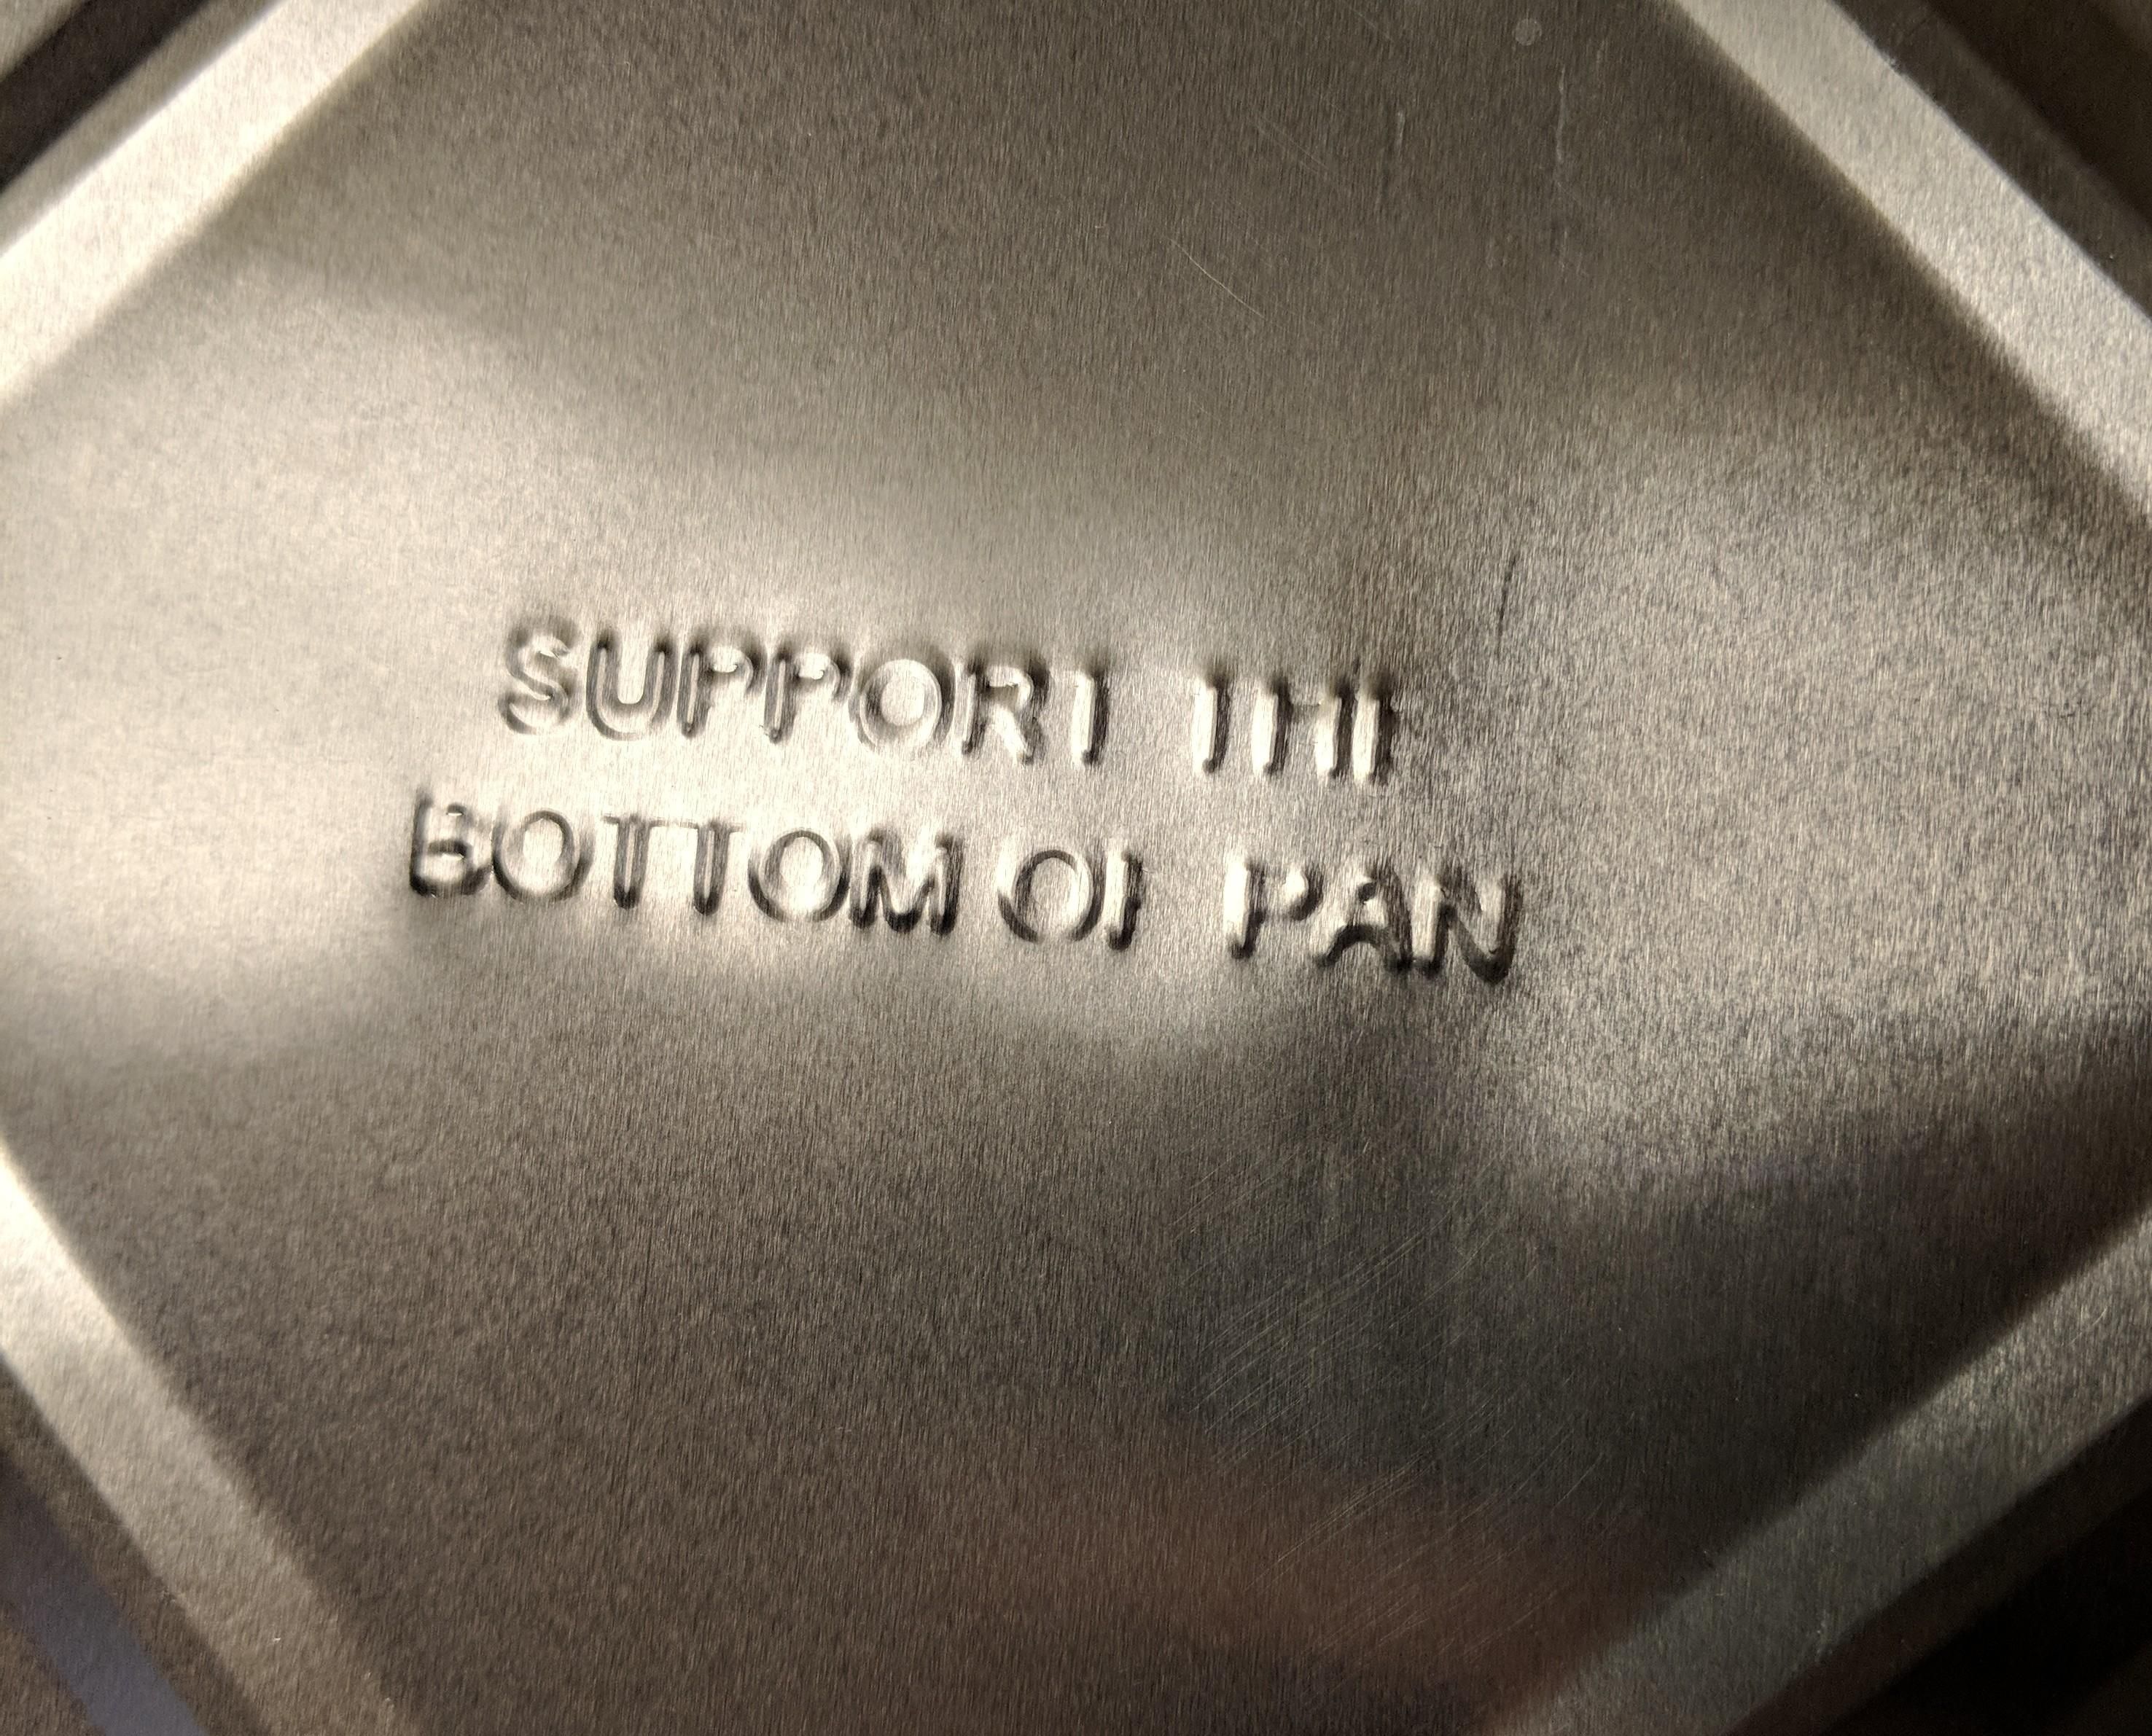 I believe in you, bottom of pan.